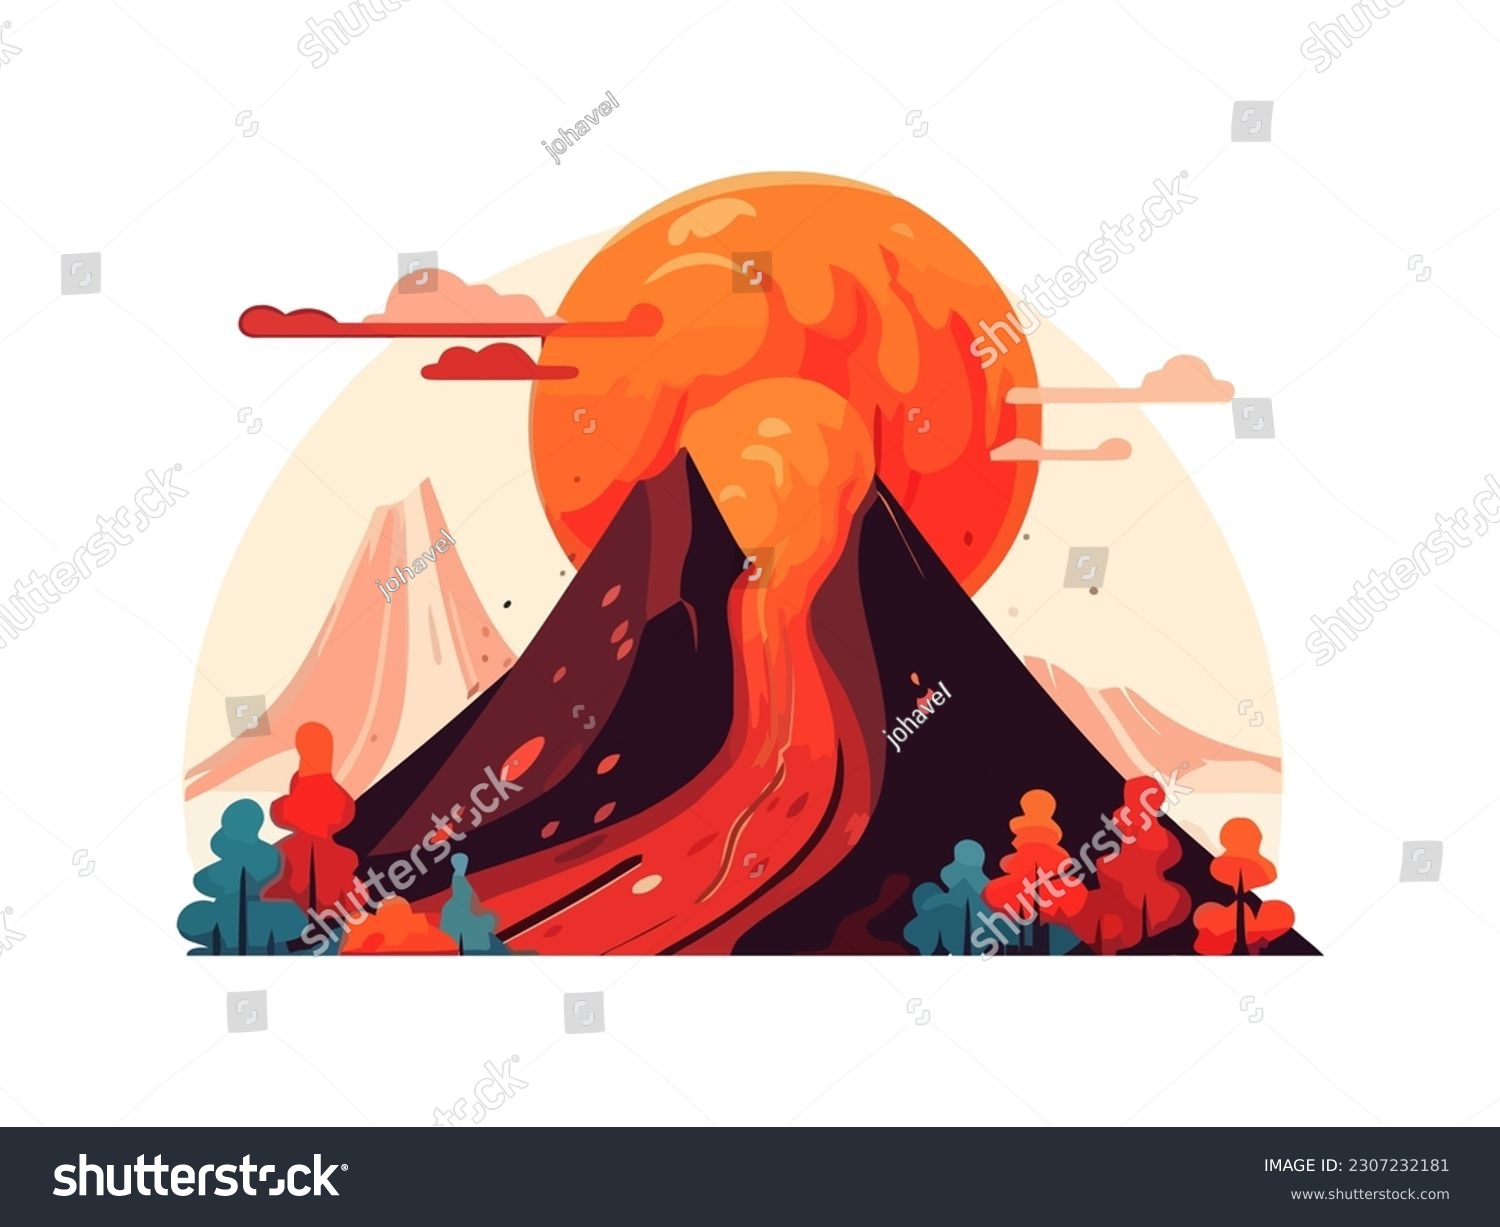 Volcano Eruption And Lava Drawing Icon Isolated Royalty Free Stock Vector 2307232181 3500